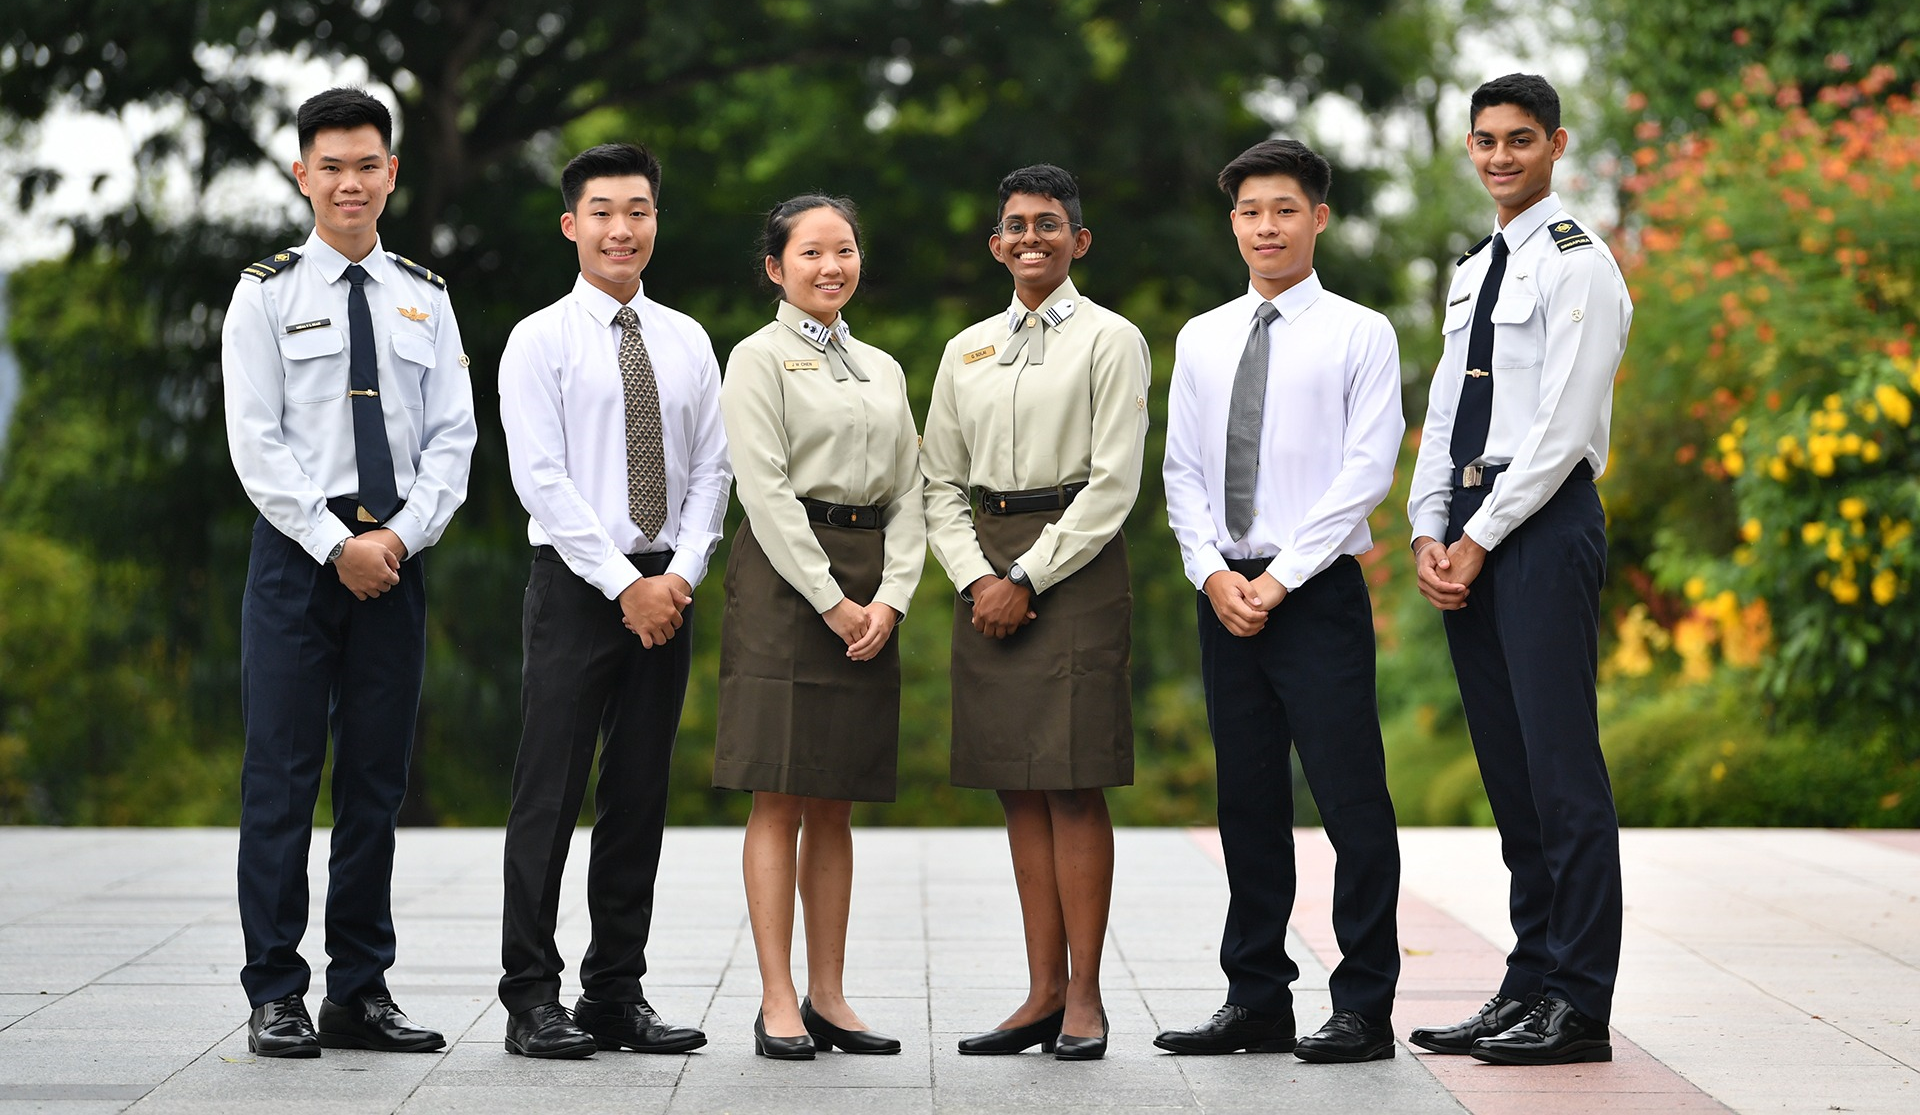 Defence scholars with a passion to serve